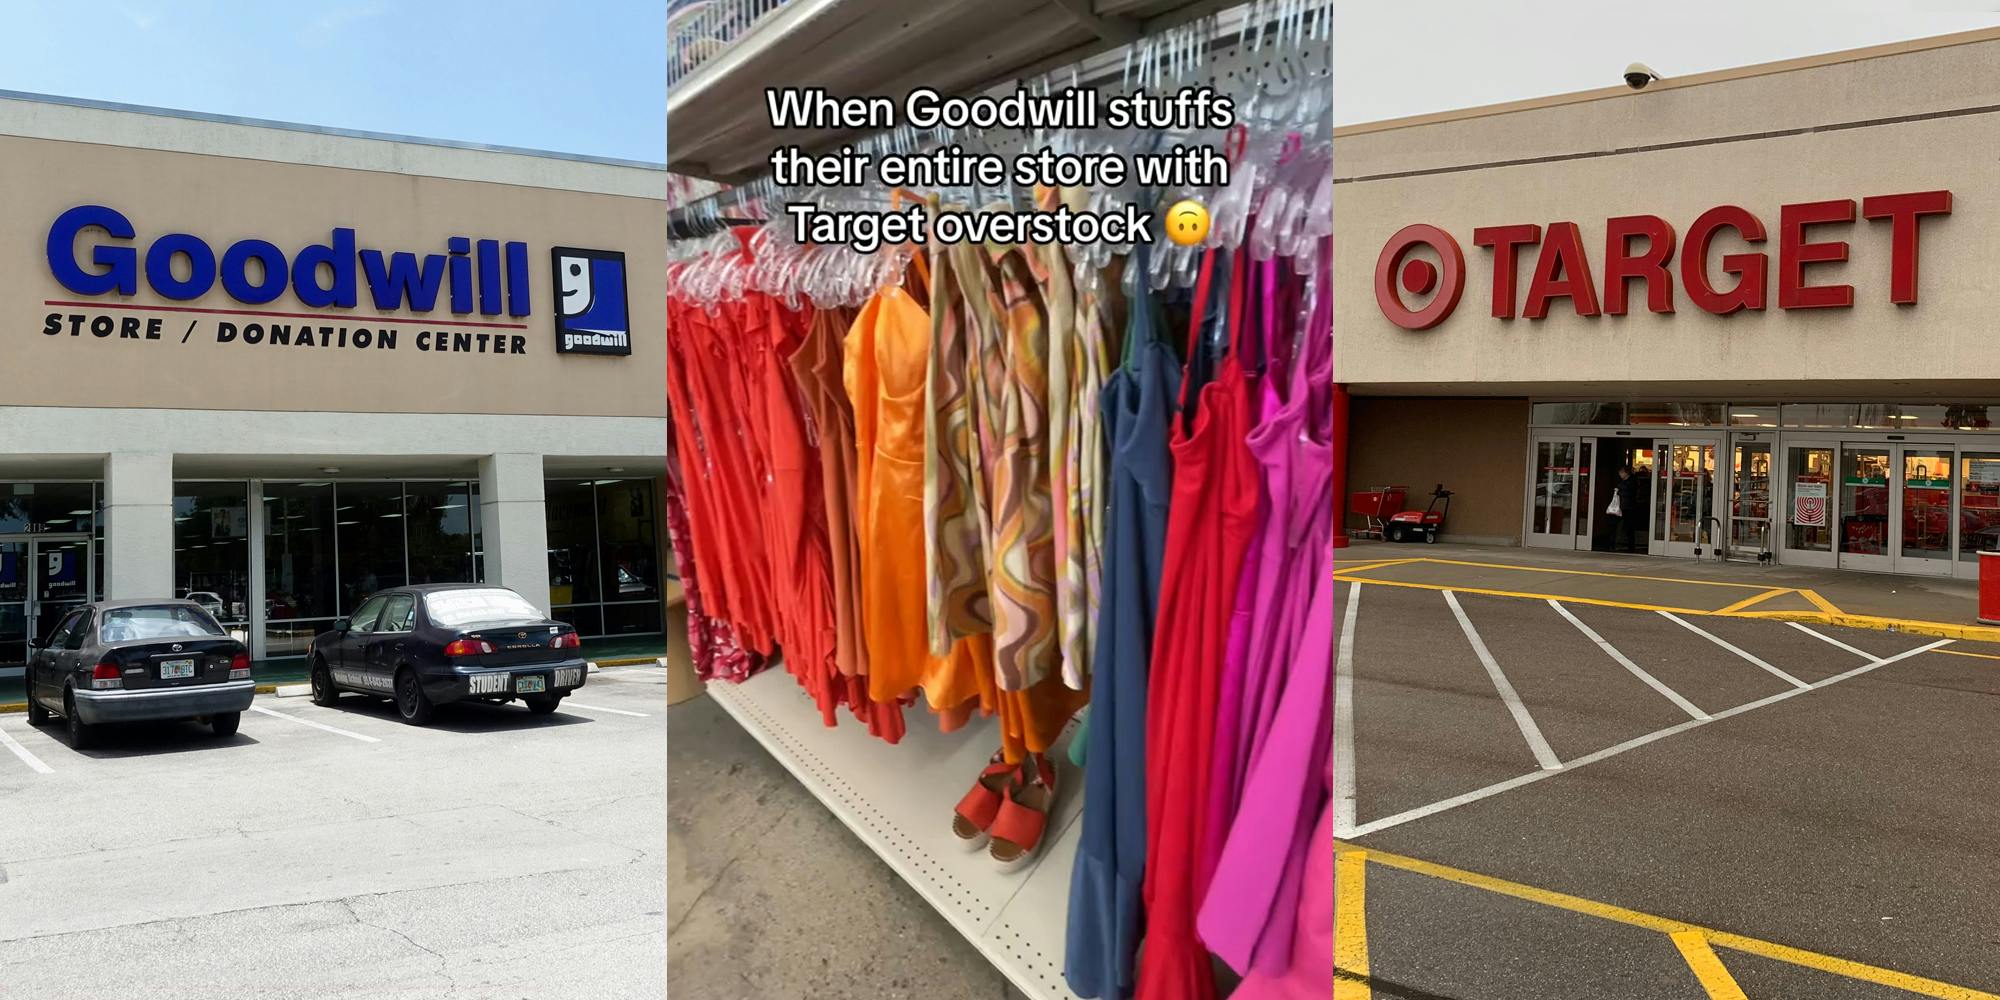 Goodwill building with sign (l) Target apparel hanging on Goodwill rack with caption "When Goodwill stuffs their entire store with Target overstock" (c) Target building with sign (r)